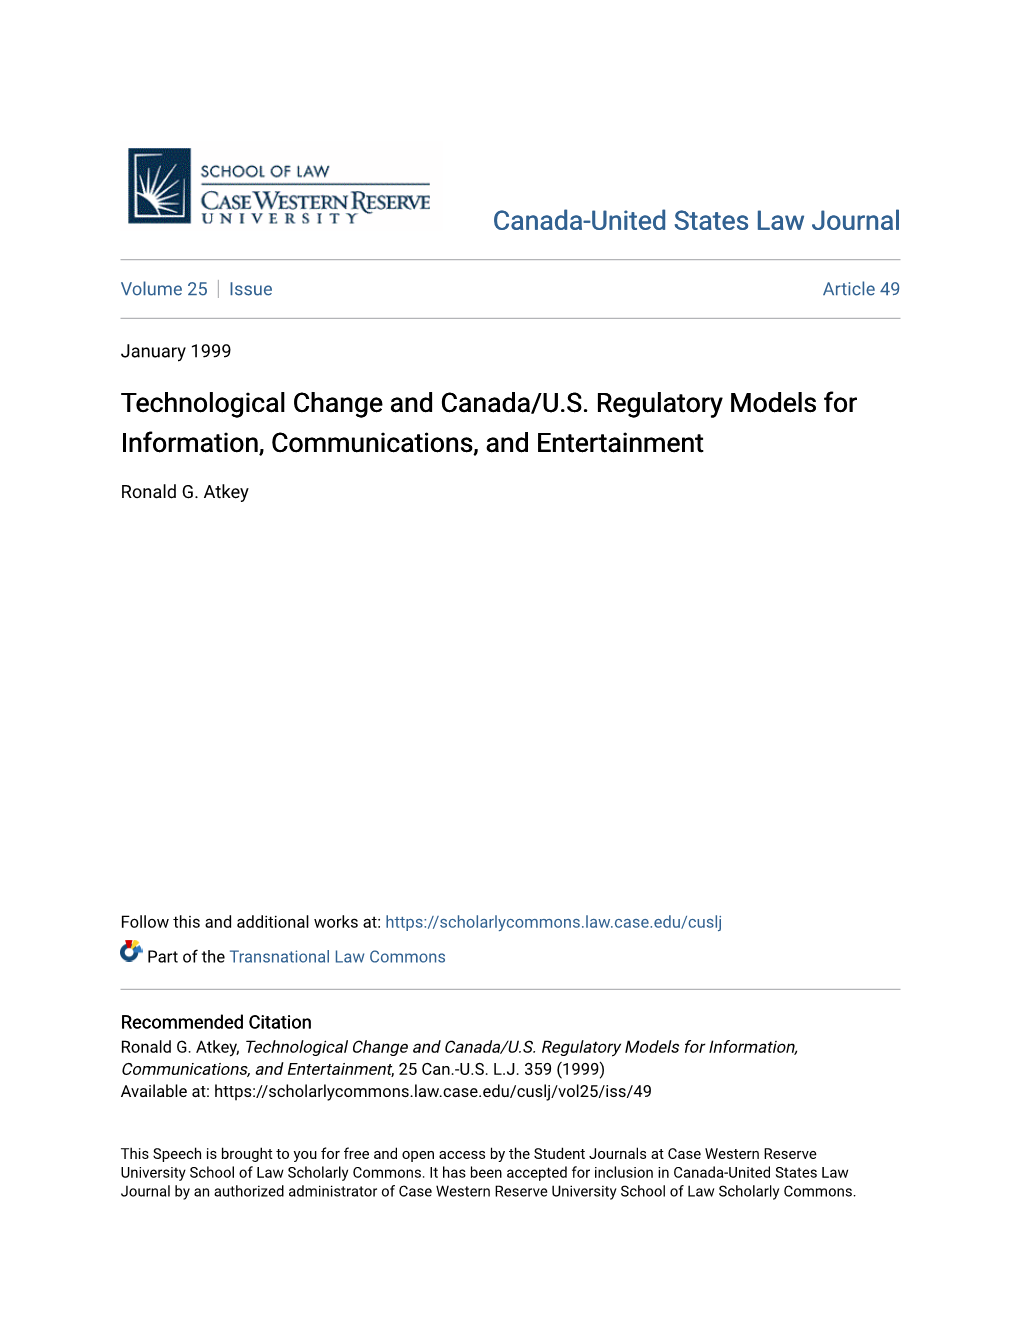 Technological Change and Canada/U.S. Regulatory Models for Information, Communications, and Entertainment